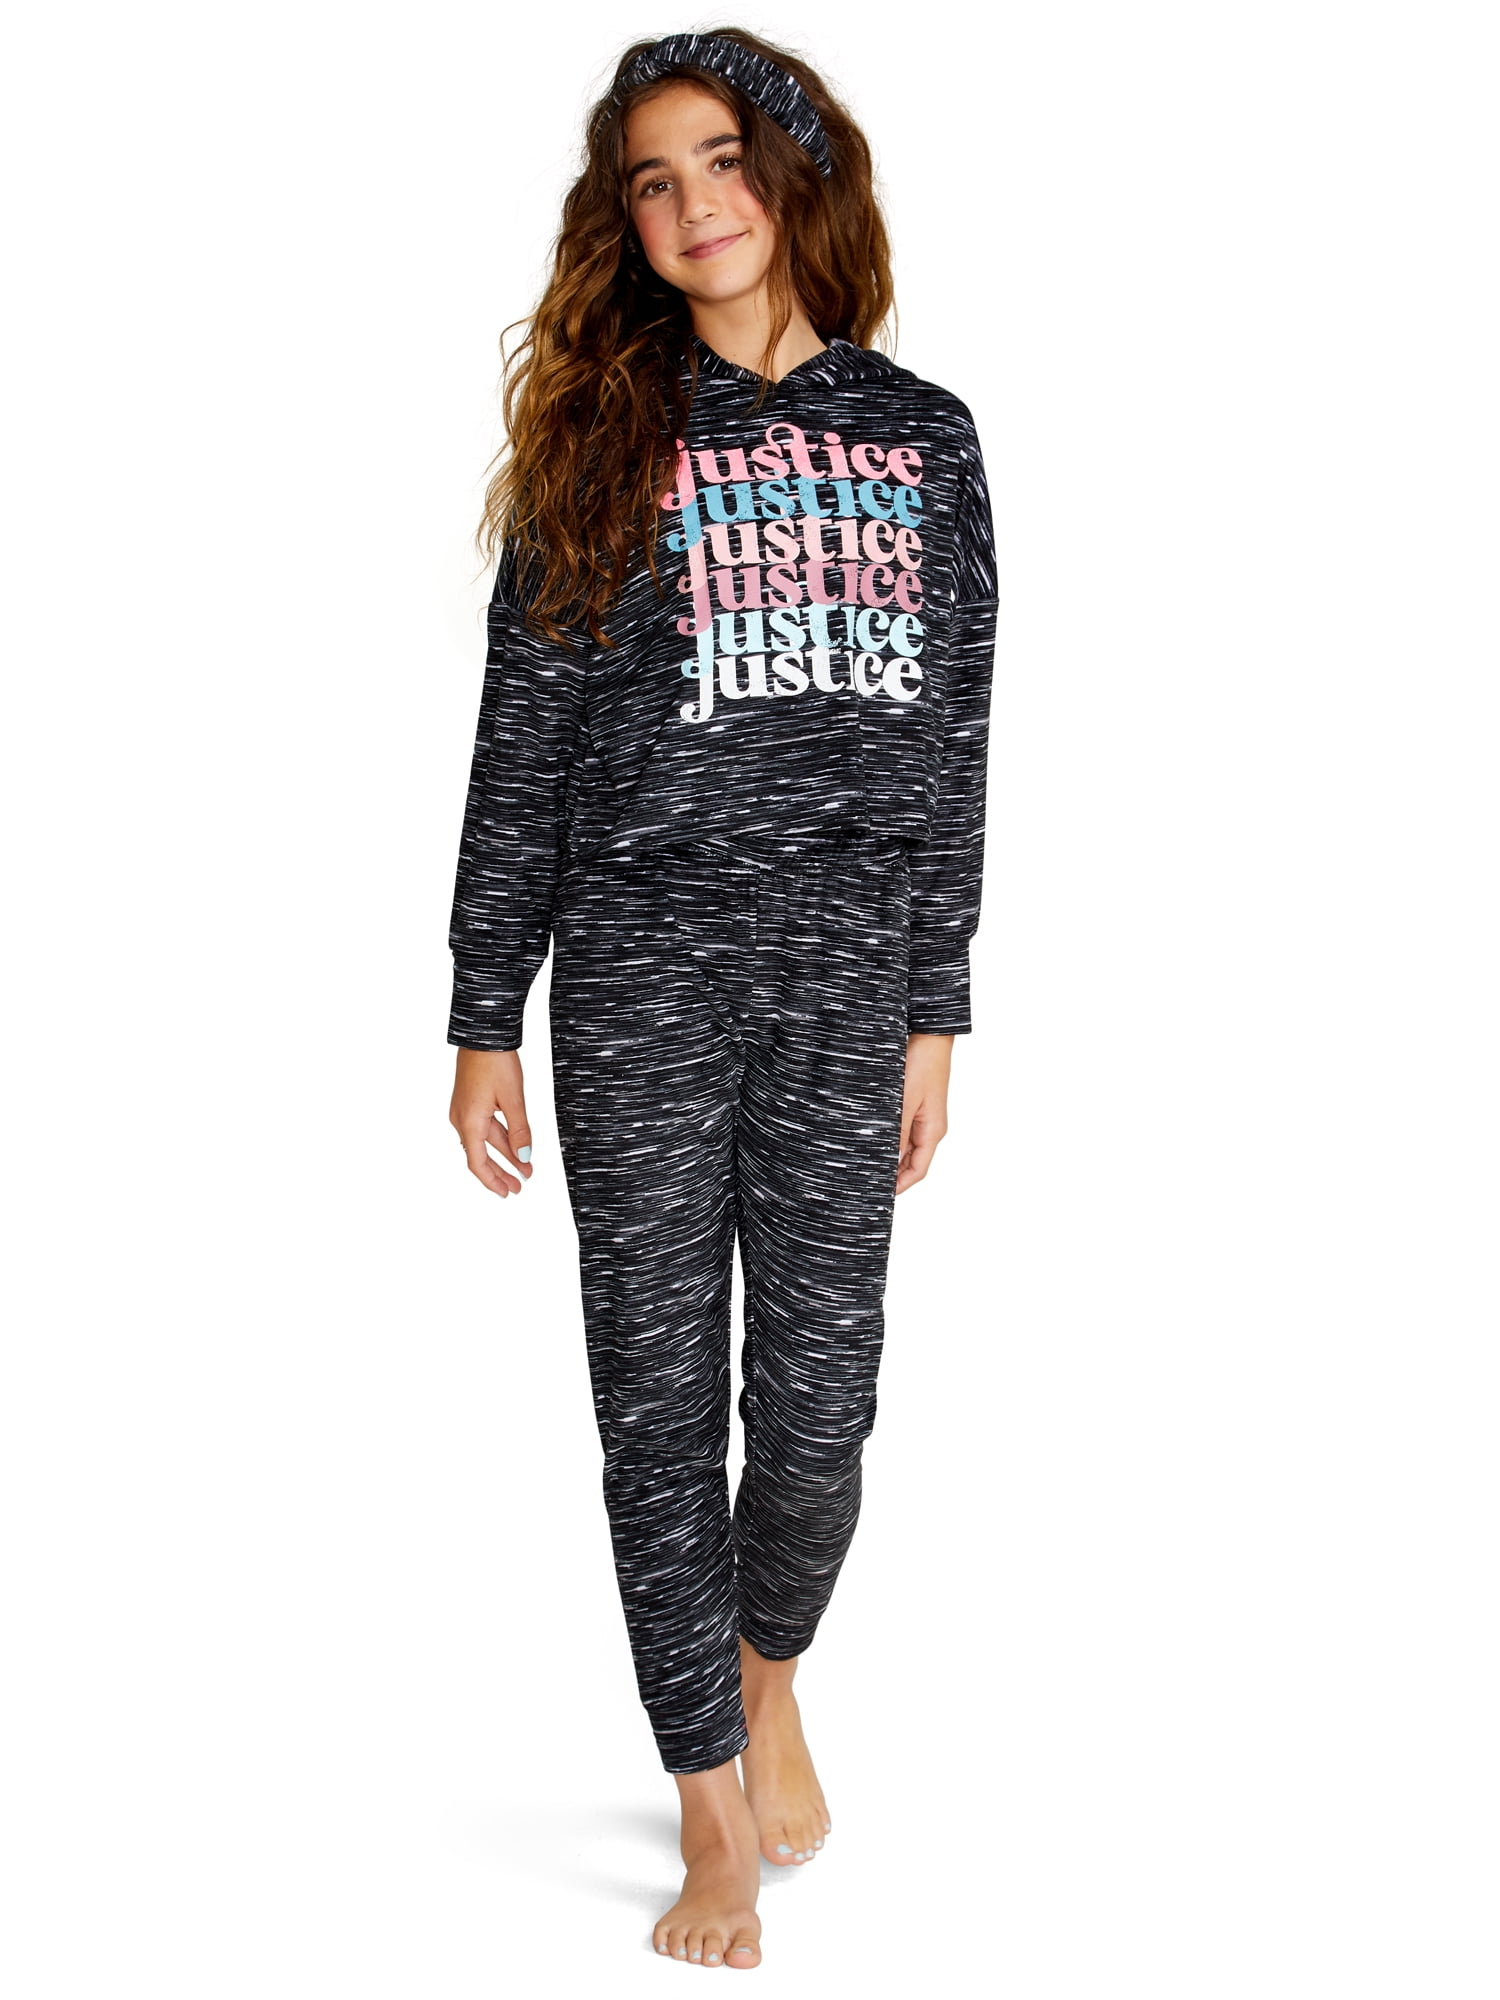 Sizes 8; 10 Details about   Justice Girls' Black Hoodie with "JUSTICE" Multi-Color Graphic 